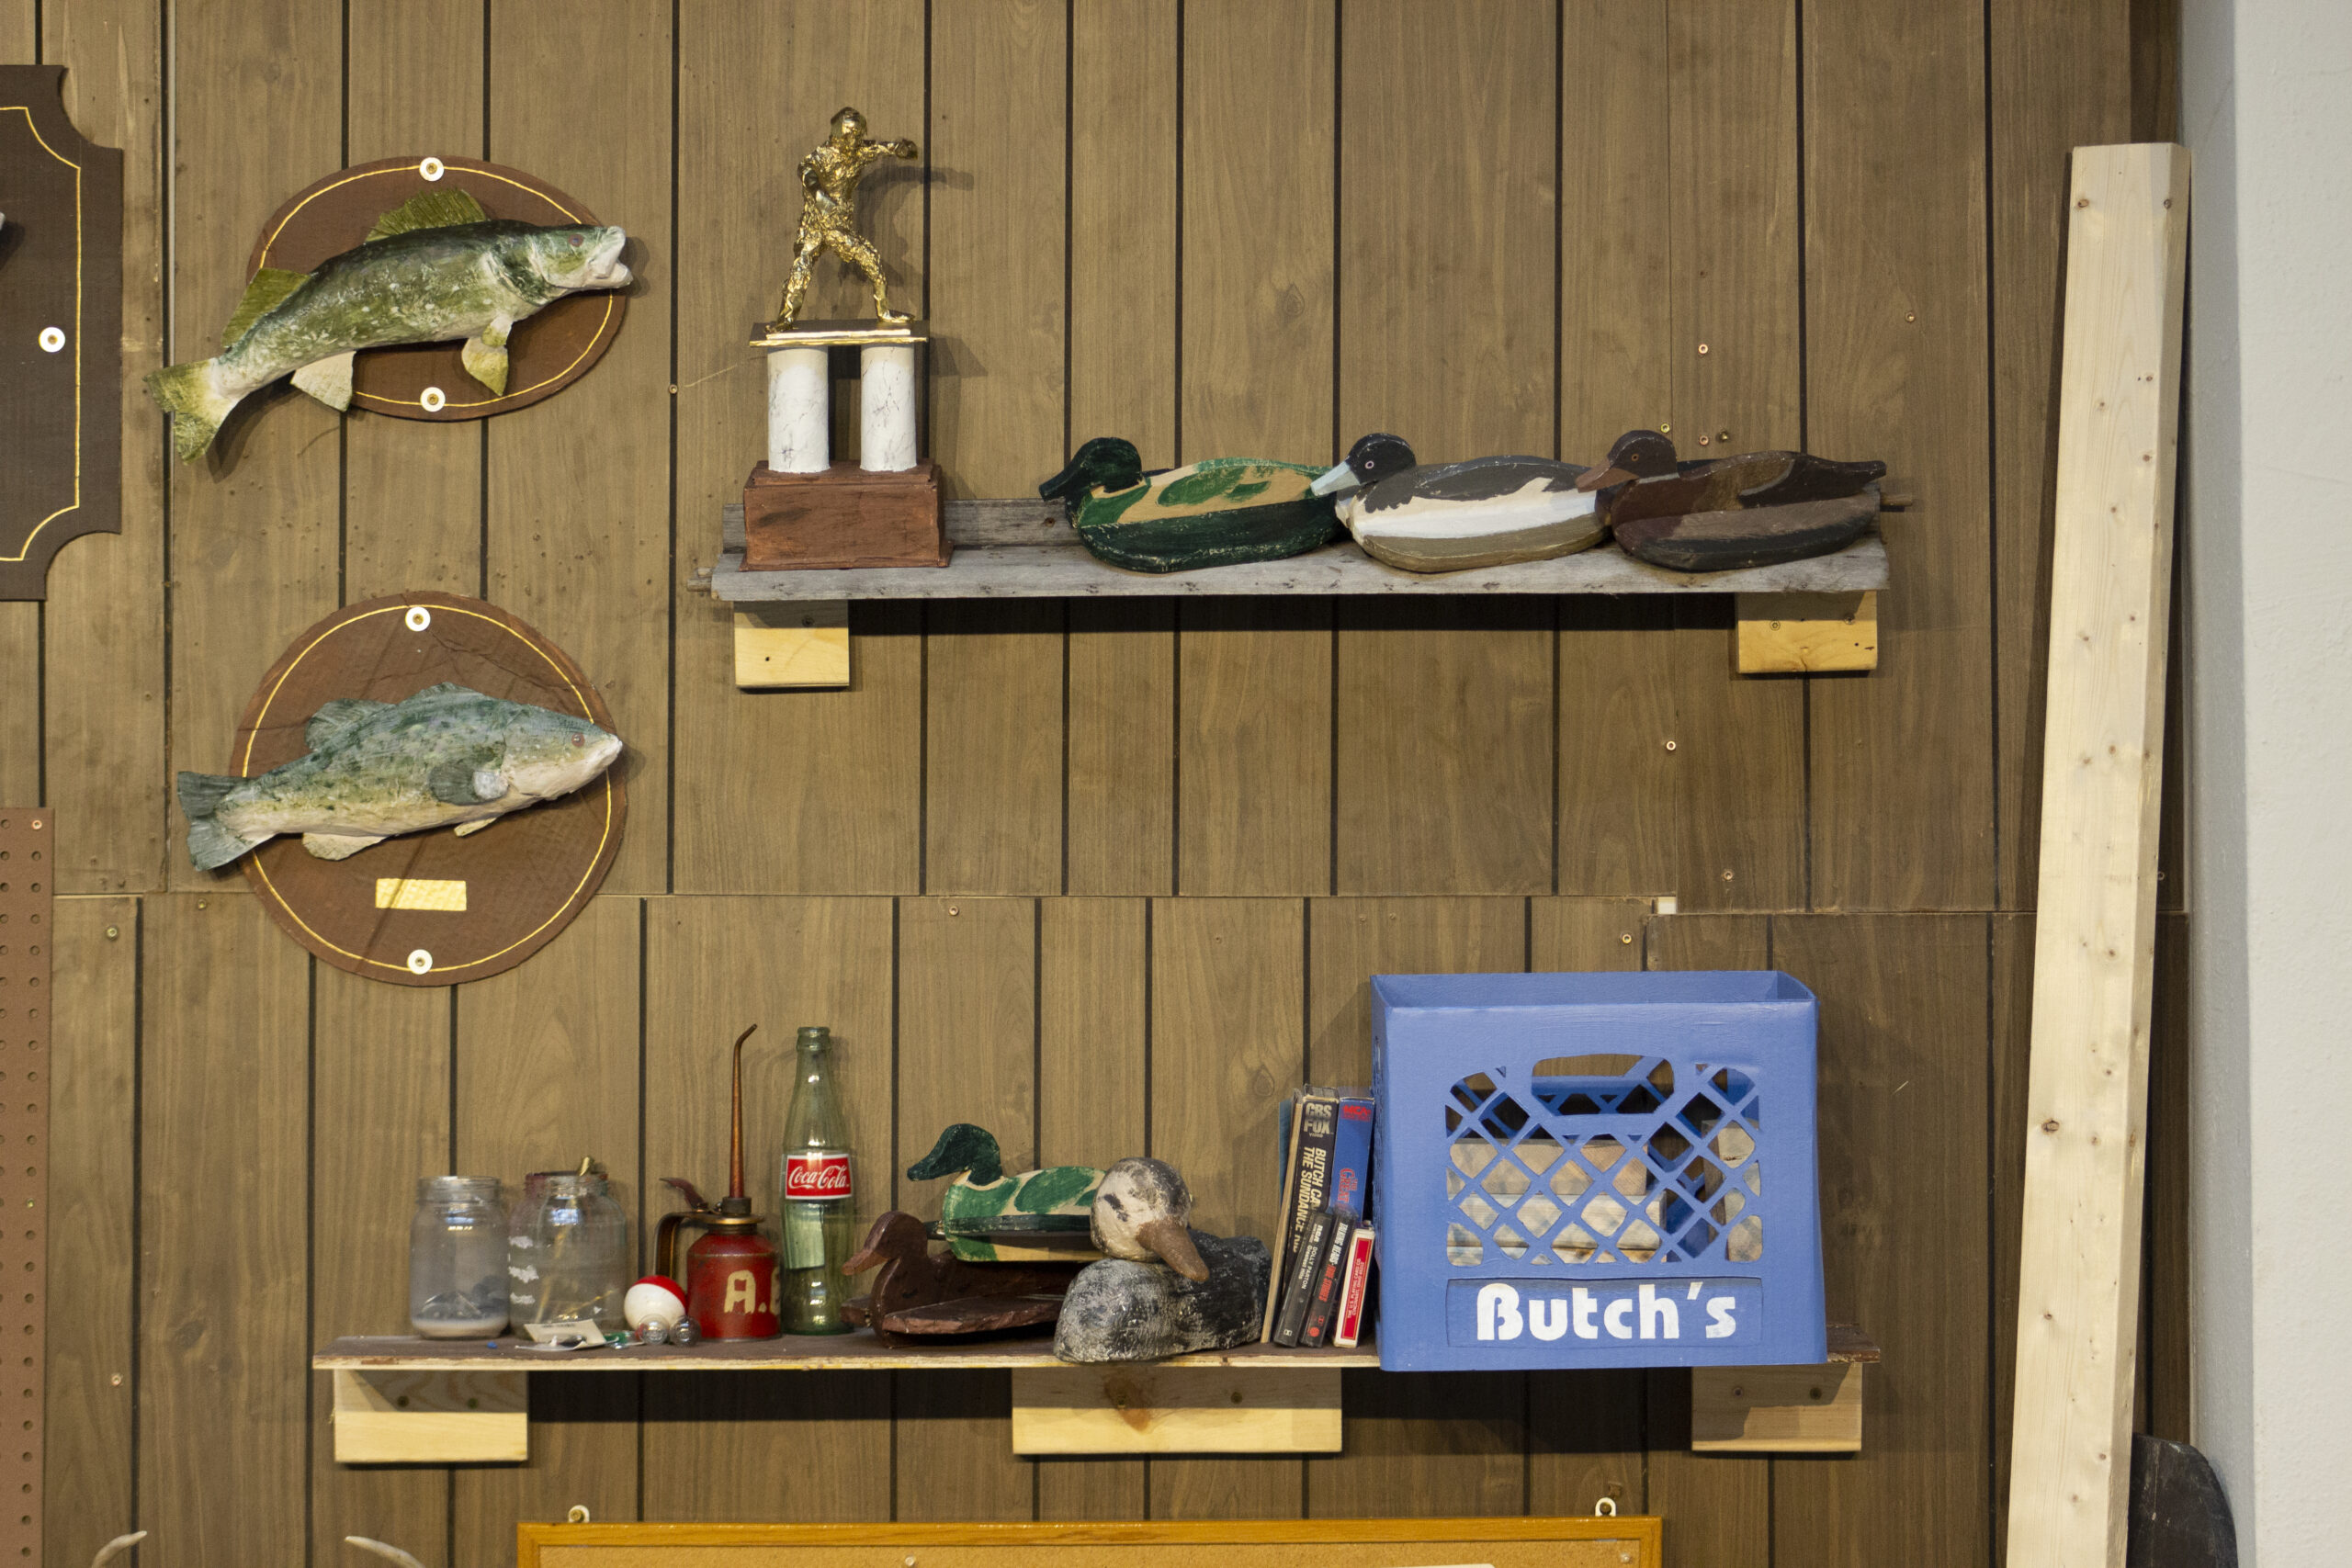 Installation on wood paneling with two mounted fish and two shelves with duck decoys, gold trophy, bottles, cassette tapes, and blue milk crate that says "Butch's."